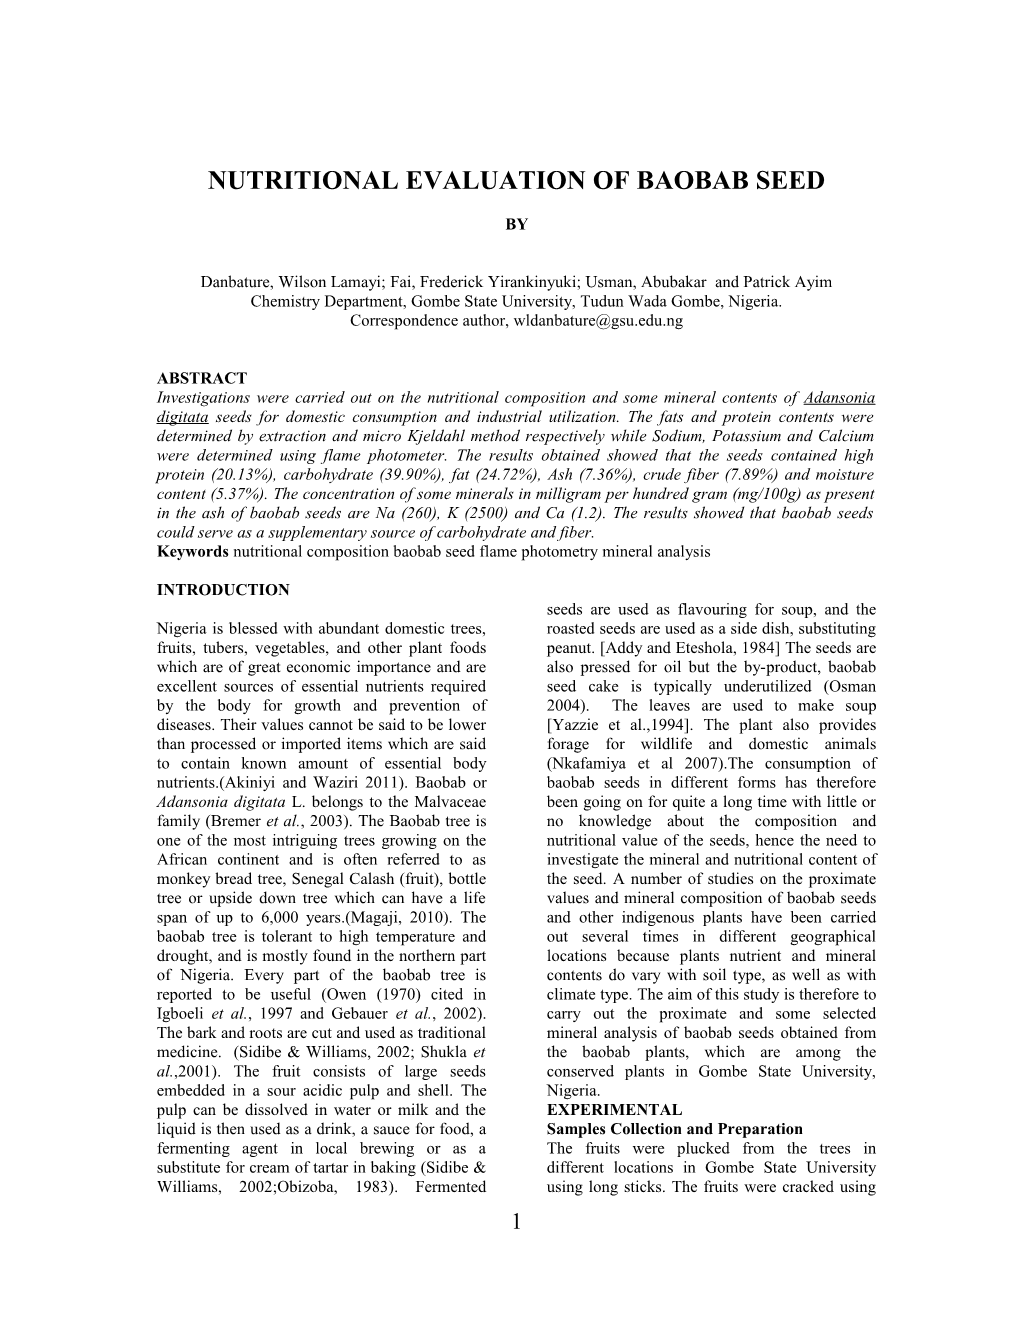 Nutritional Evaluation of Baobab Seed